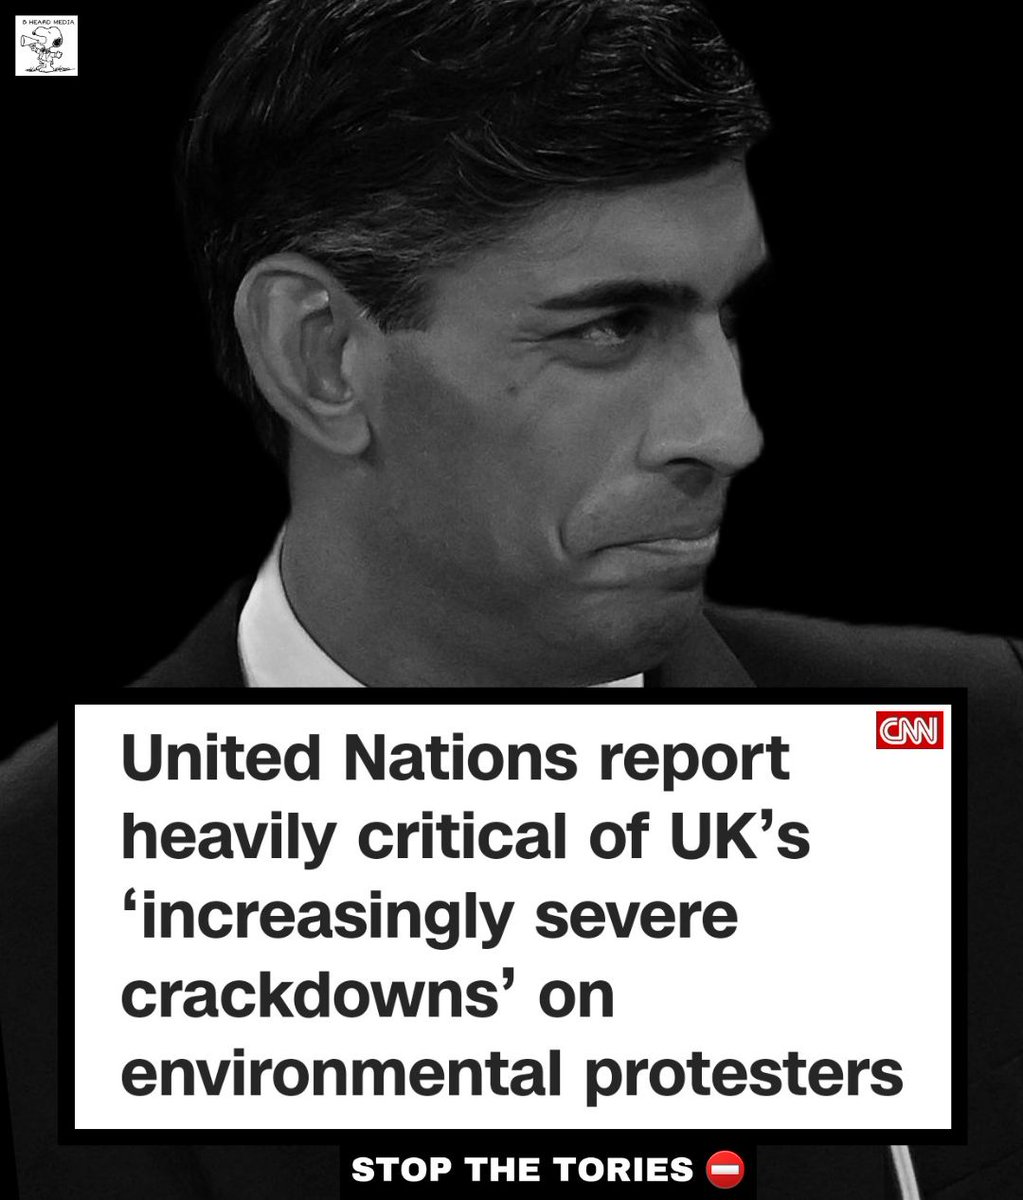 United Nations report heavily critical of UK’s ‘increasingly severe crackdowns’ on environmental protesters!

“It had been almost unheard of since the 1930s for members of the public to be imprisoned for peaceful protest in the UK,” 

#RishiSunak 
#ToryDictatorship
#ToriesOut565